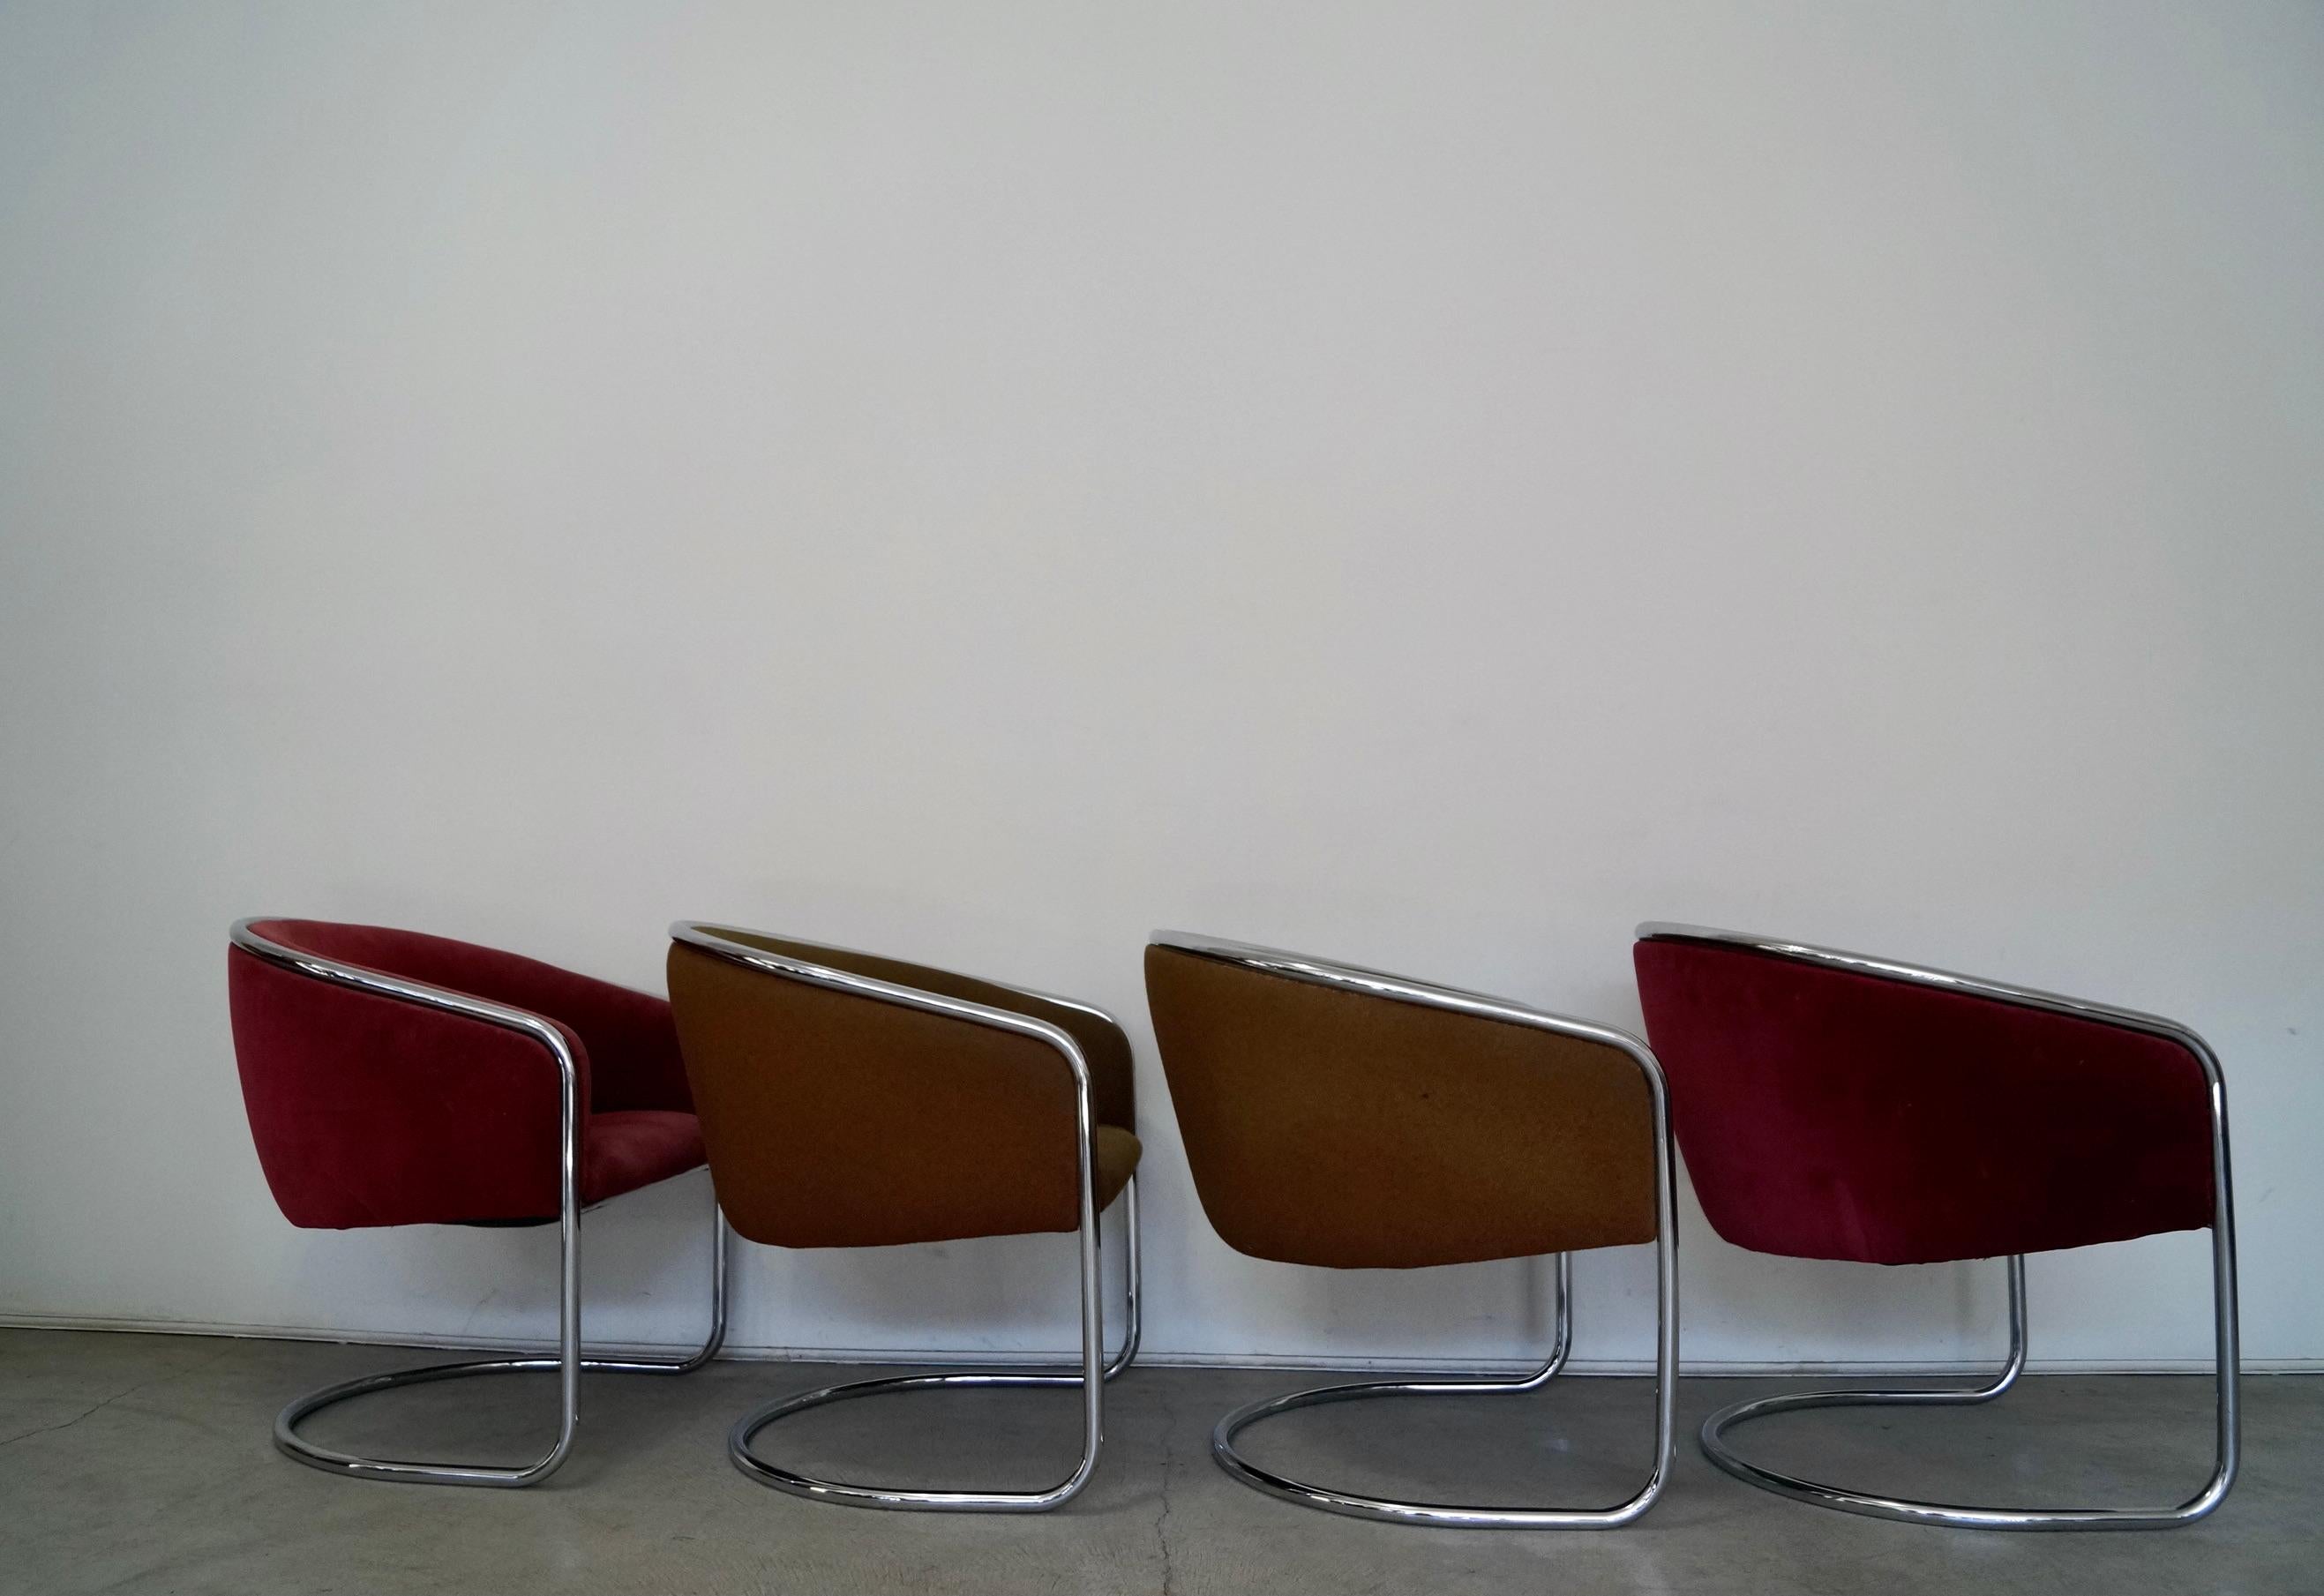 1970's Mid-Century Modern Thonet Chrome Armchairs - Set of Four For Sale 4